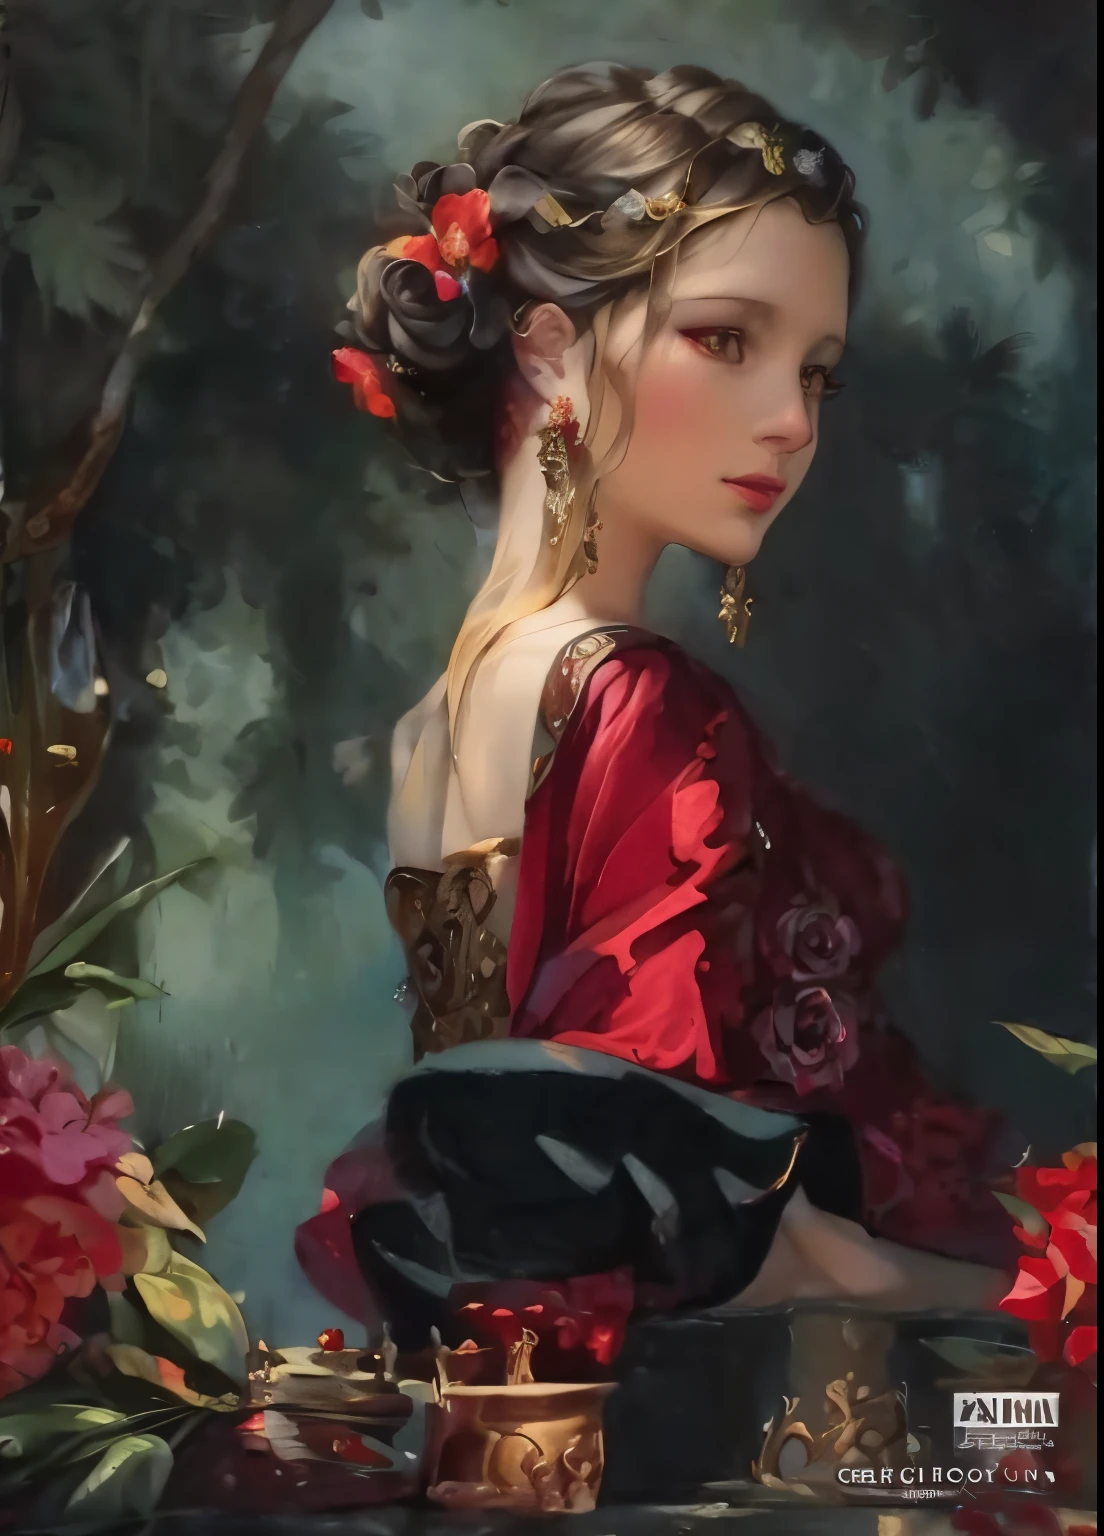 Painting of a woman in a red dress with flowers in her hair, elegant digital painting, inspired by Magali Villeneuve, renaissance digital painting, beautiful character painting, in style of wlop, graphic artist magali villeneuve, magali villeneuve', Baroque digital painting, Alphonse Mucha Magali Villeneuve, WLOP Painting Style, digital art of an elegant